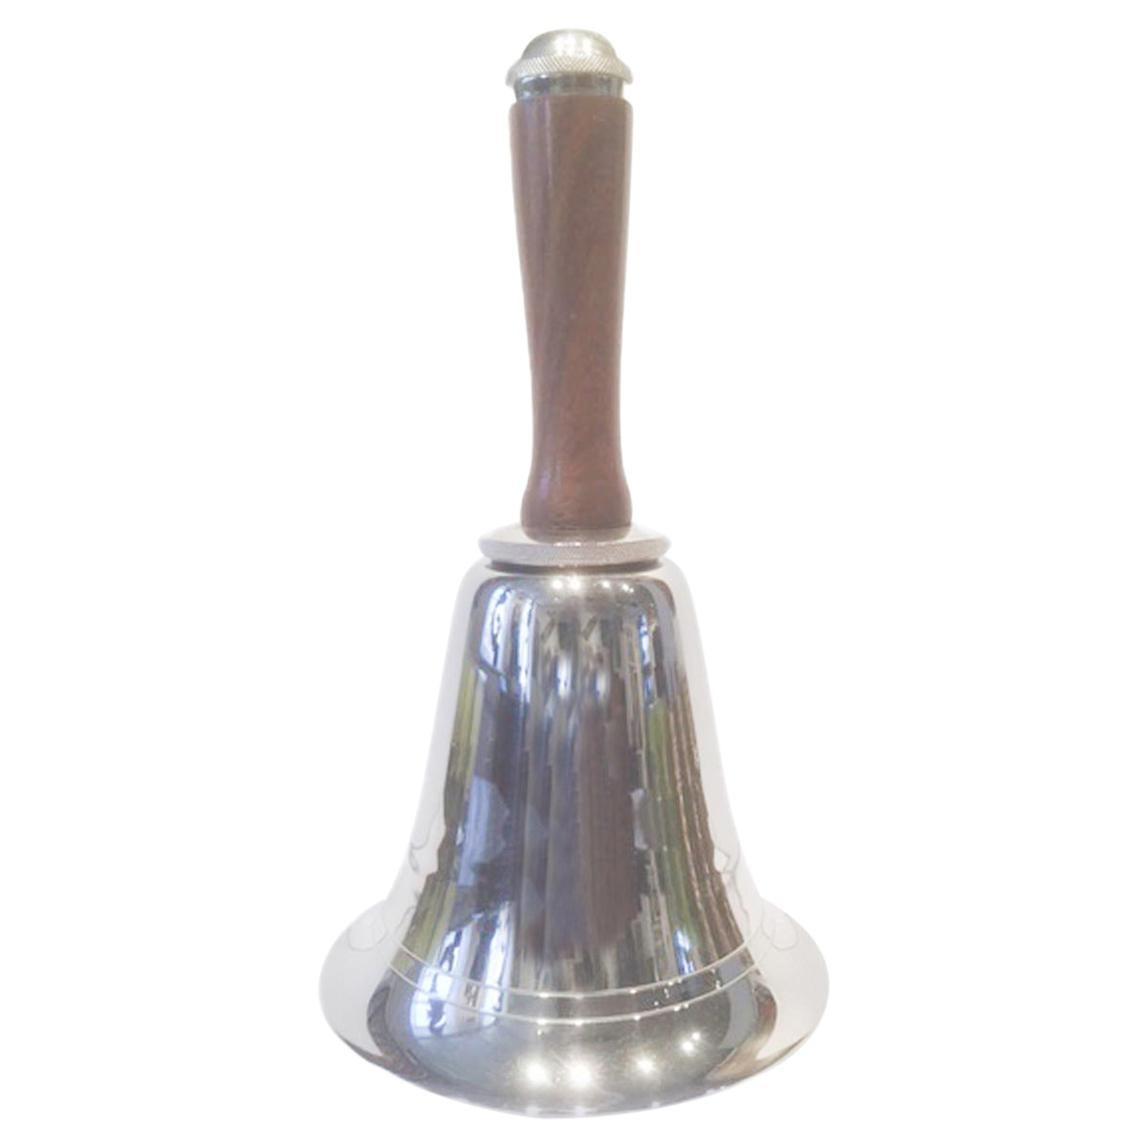 Vintage Town Crier Bell-Form Cocktail Shaker, Complete with Clapper